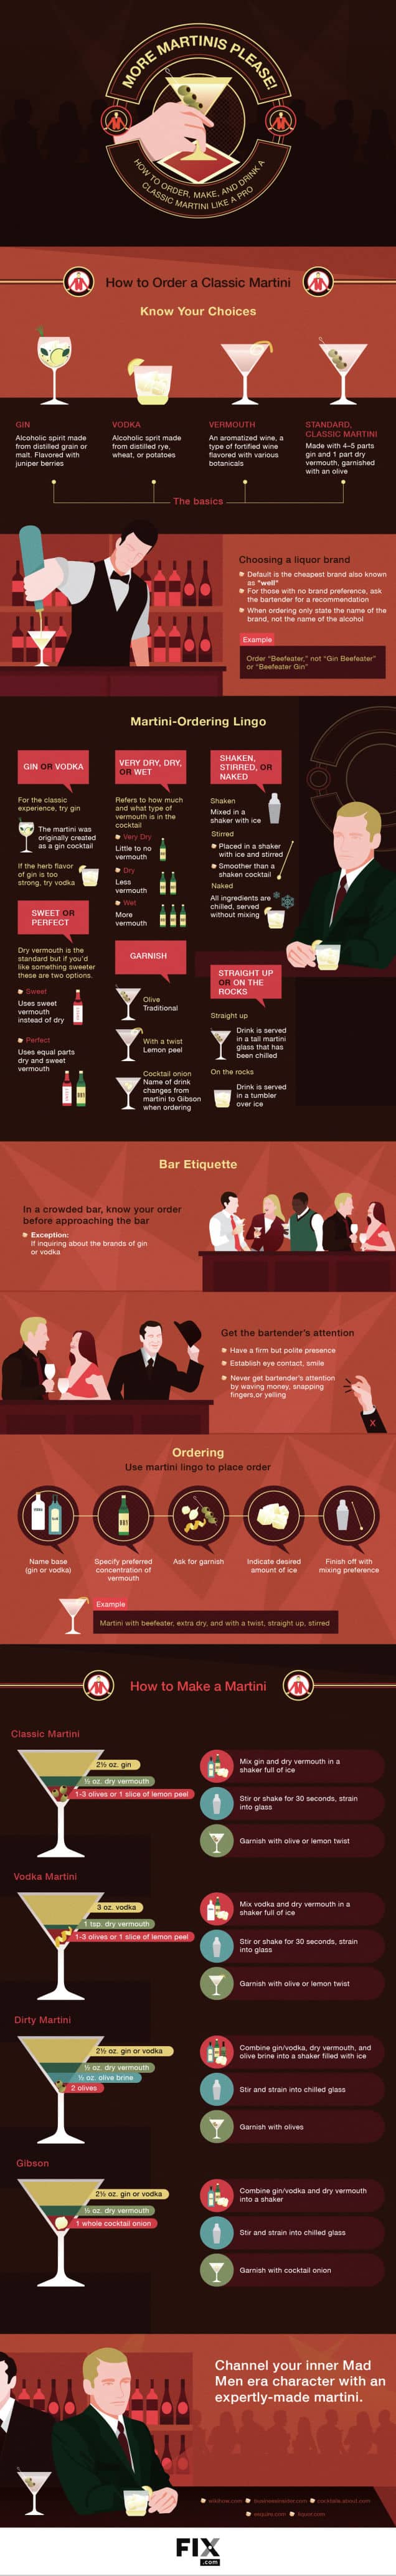 Martinis Guide Infographic